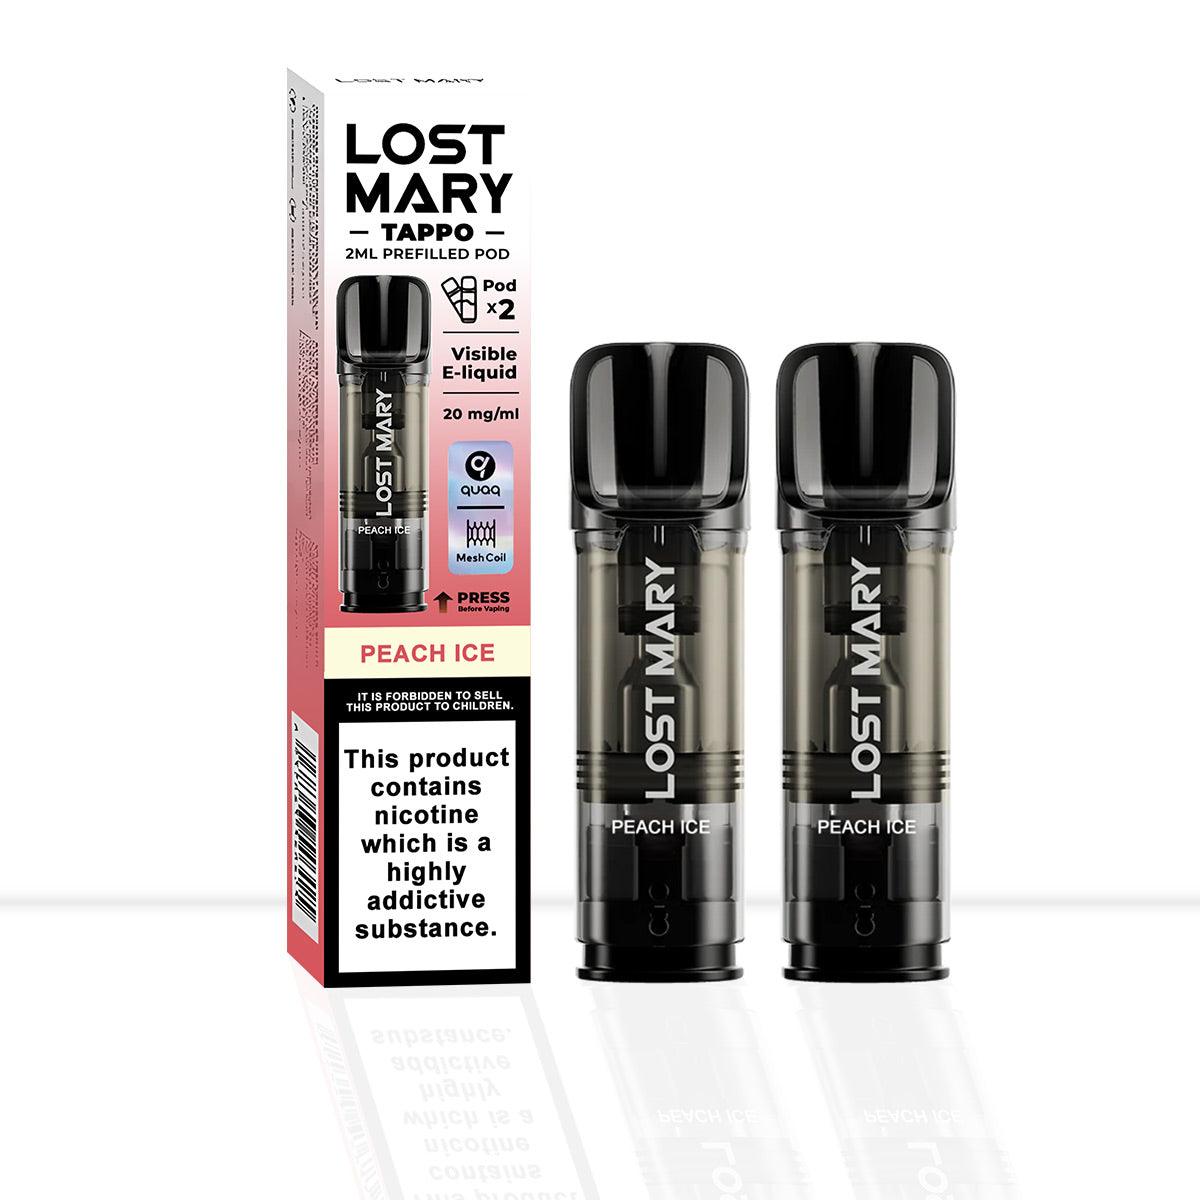 Lost Mary Tappo Peach Ice Vape Pods - Lost Mary Tappo Peach Ice Vape Pods - Pod & Refills